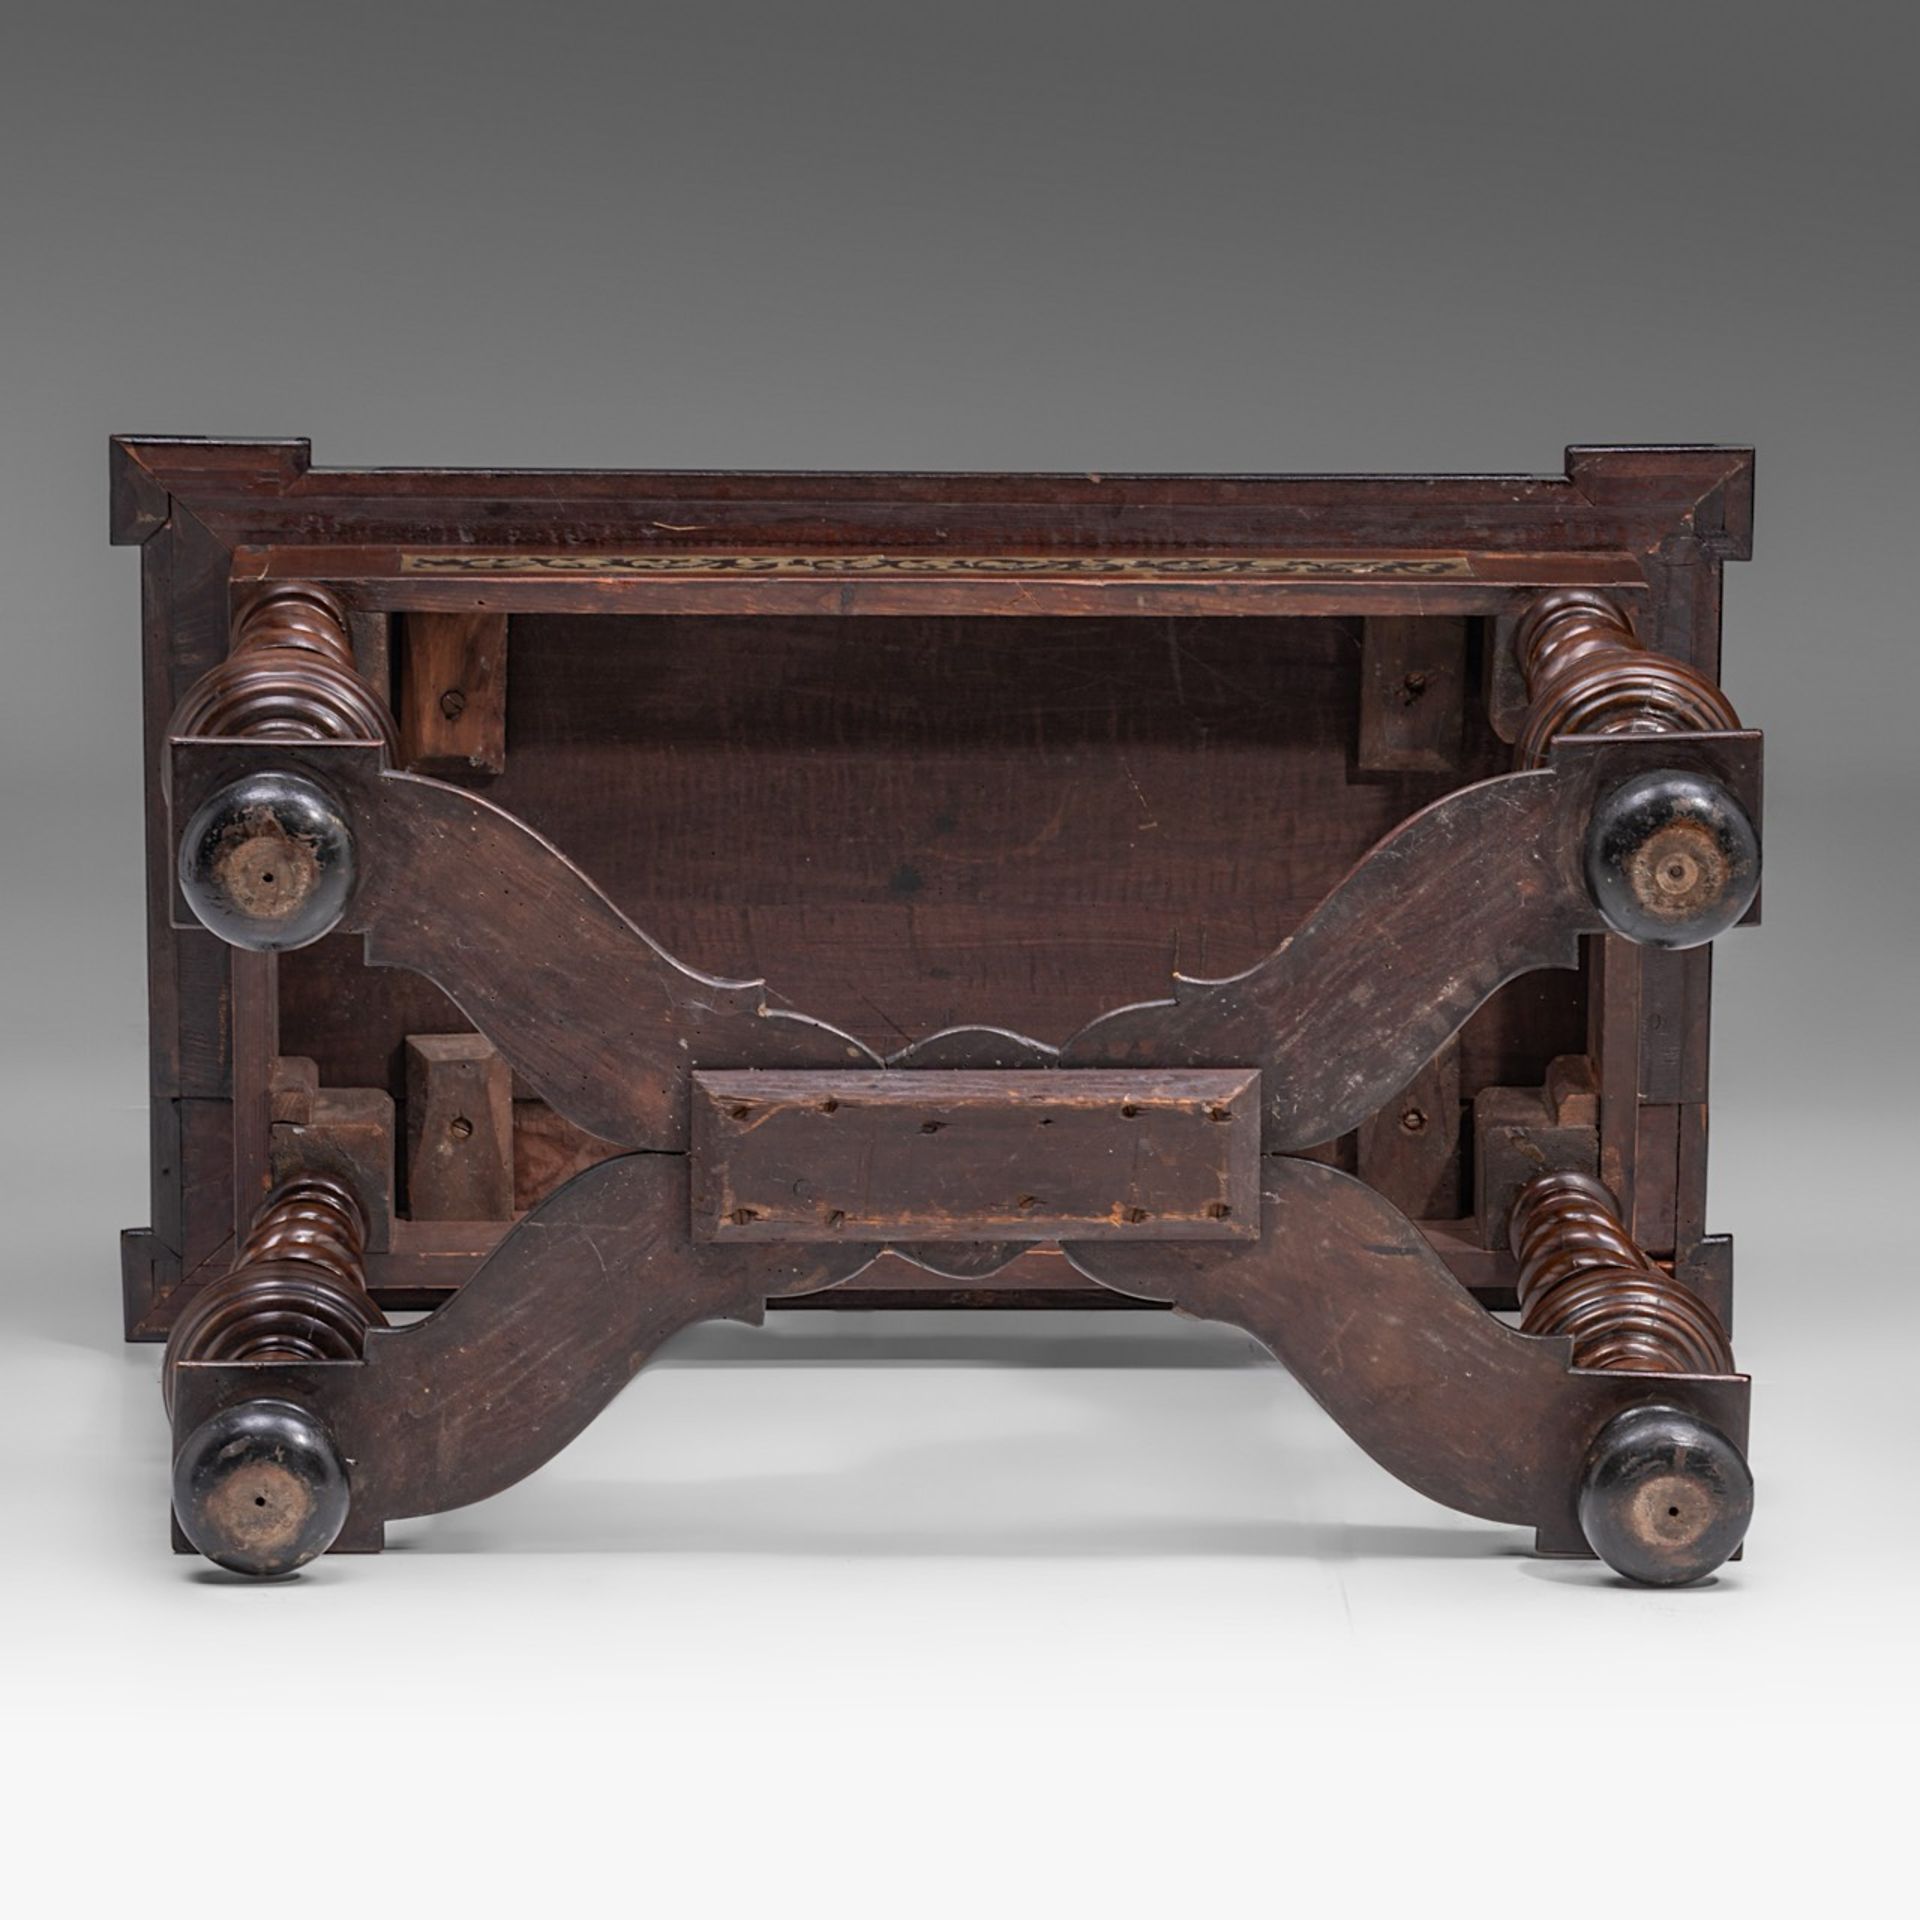 A fine Baroque rosewood and mahogany veneered centre table, 17thC, H 80 - W 105 - D 60 cm - Image 7 of 7